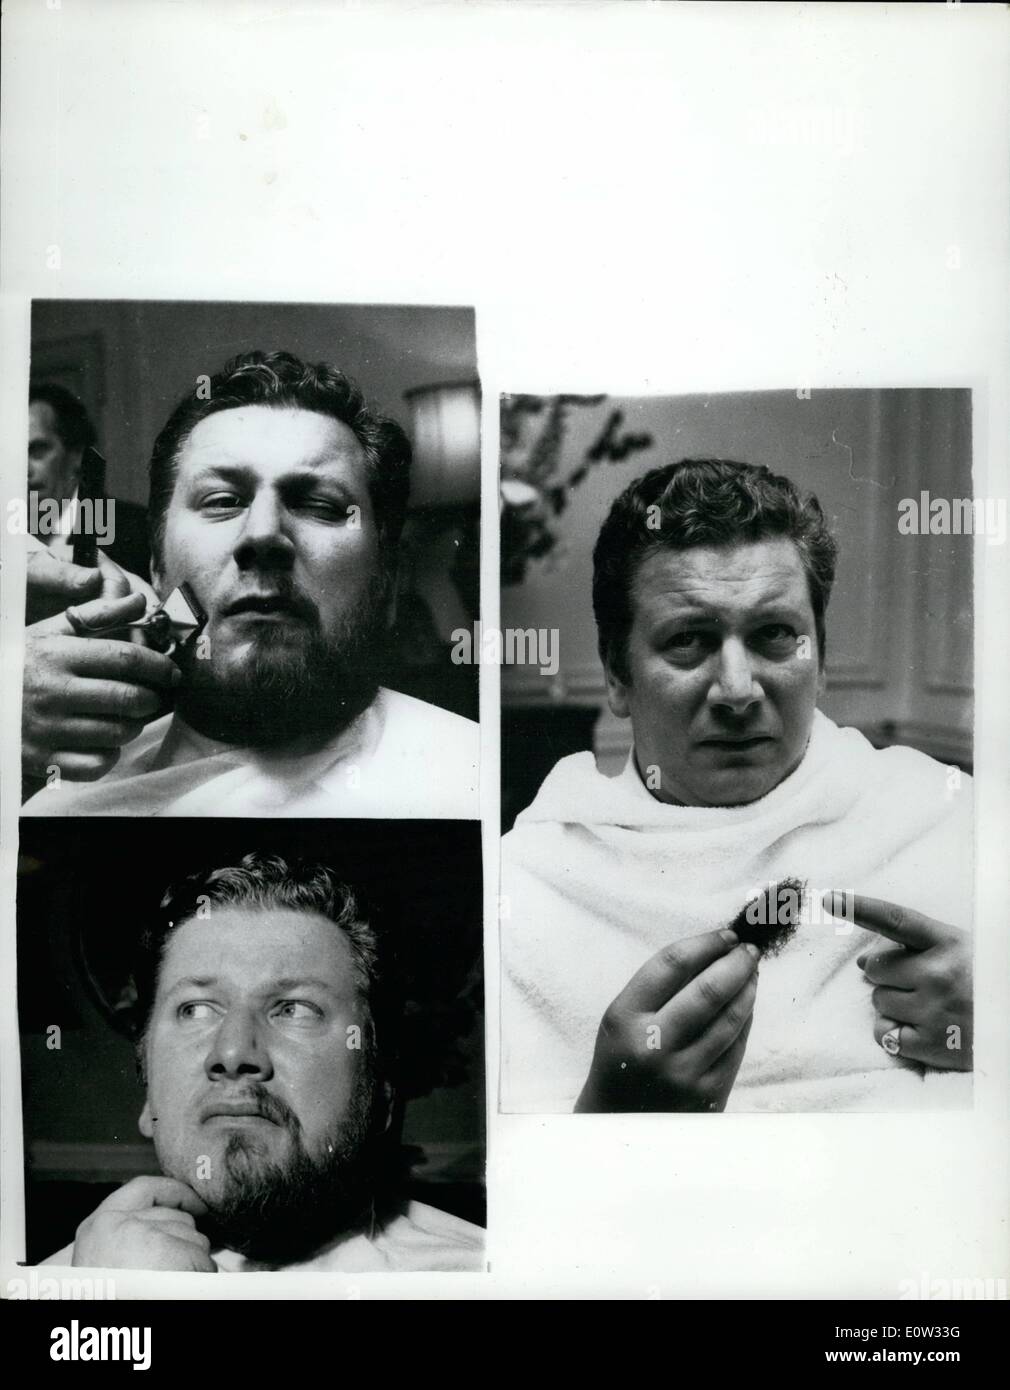 May 05, 1961 - PETER USTINOV HAS HIS BEARD REMOVED.. Famous actor PETER USTINOV who has been bearded for ten years paid a vieit to the barber yeeterday to have his beard removed.. This is for his role of CAPTAIN VERE in the new film ''Billy Budd''...for Captain Vere is .lean shaven., KEYSTONE PHOTO SHOWS: The Berber gets to work with his Clippers and bey presto,.. PETER USTINOV minus his hirsute adornment. Stock Photo